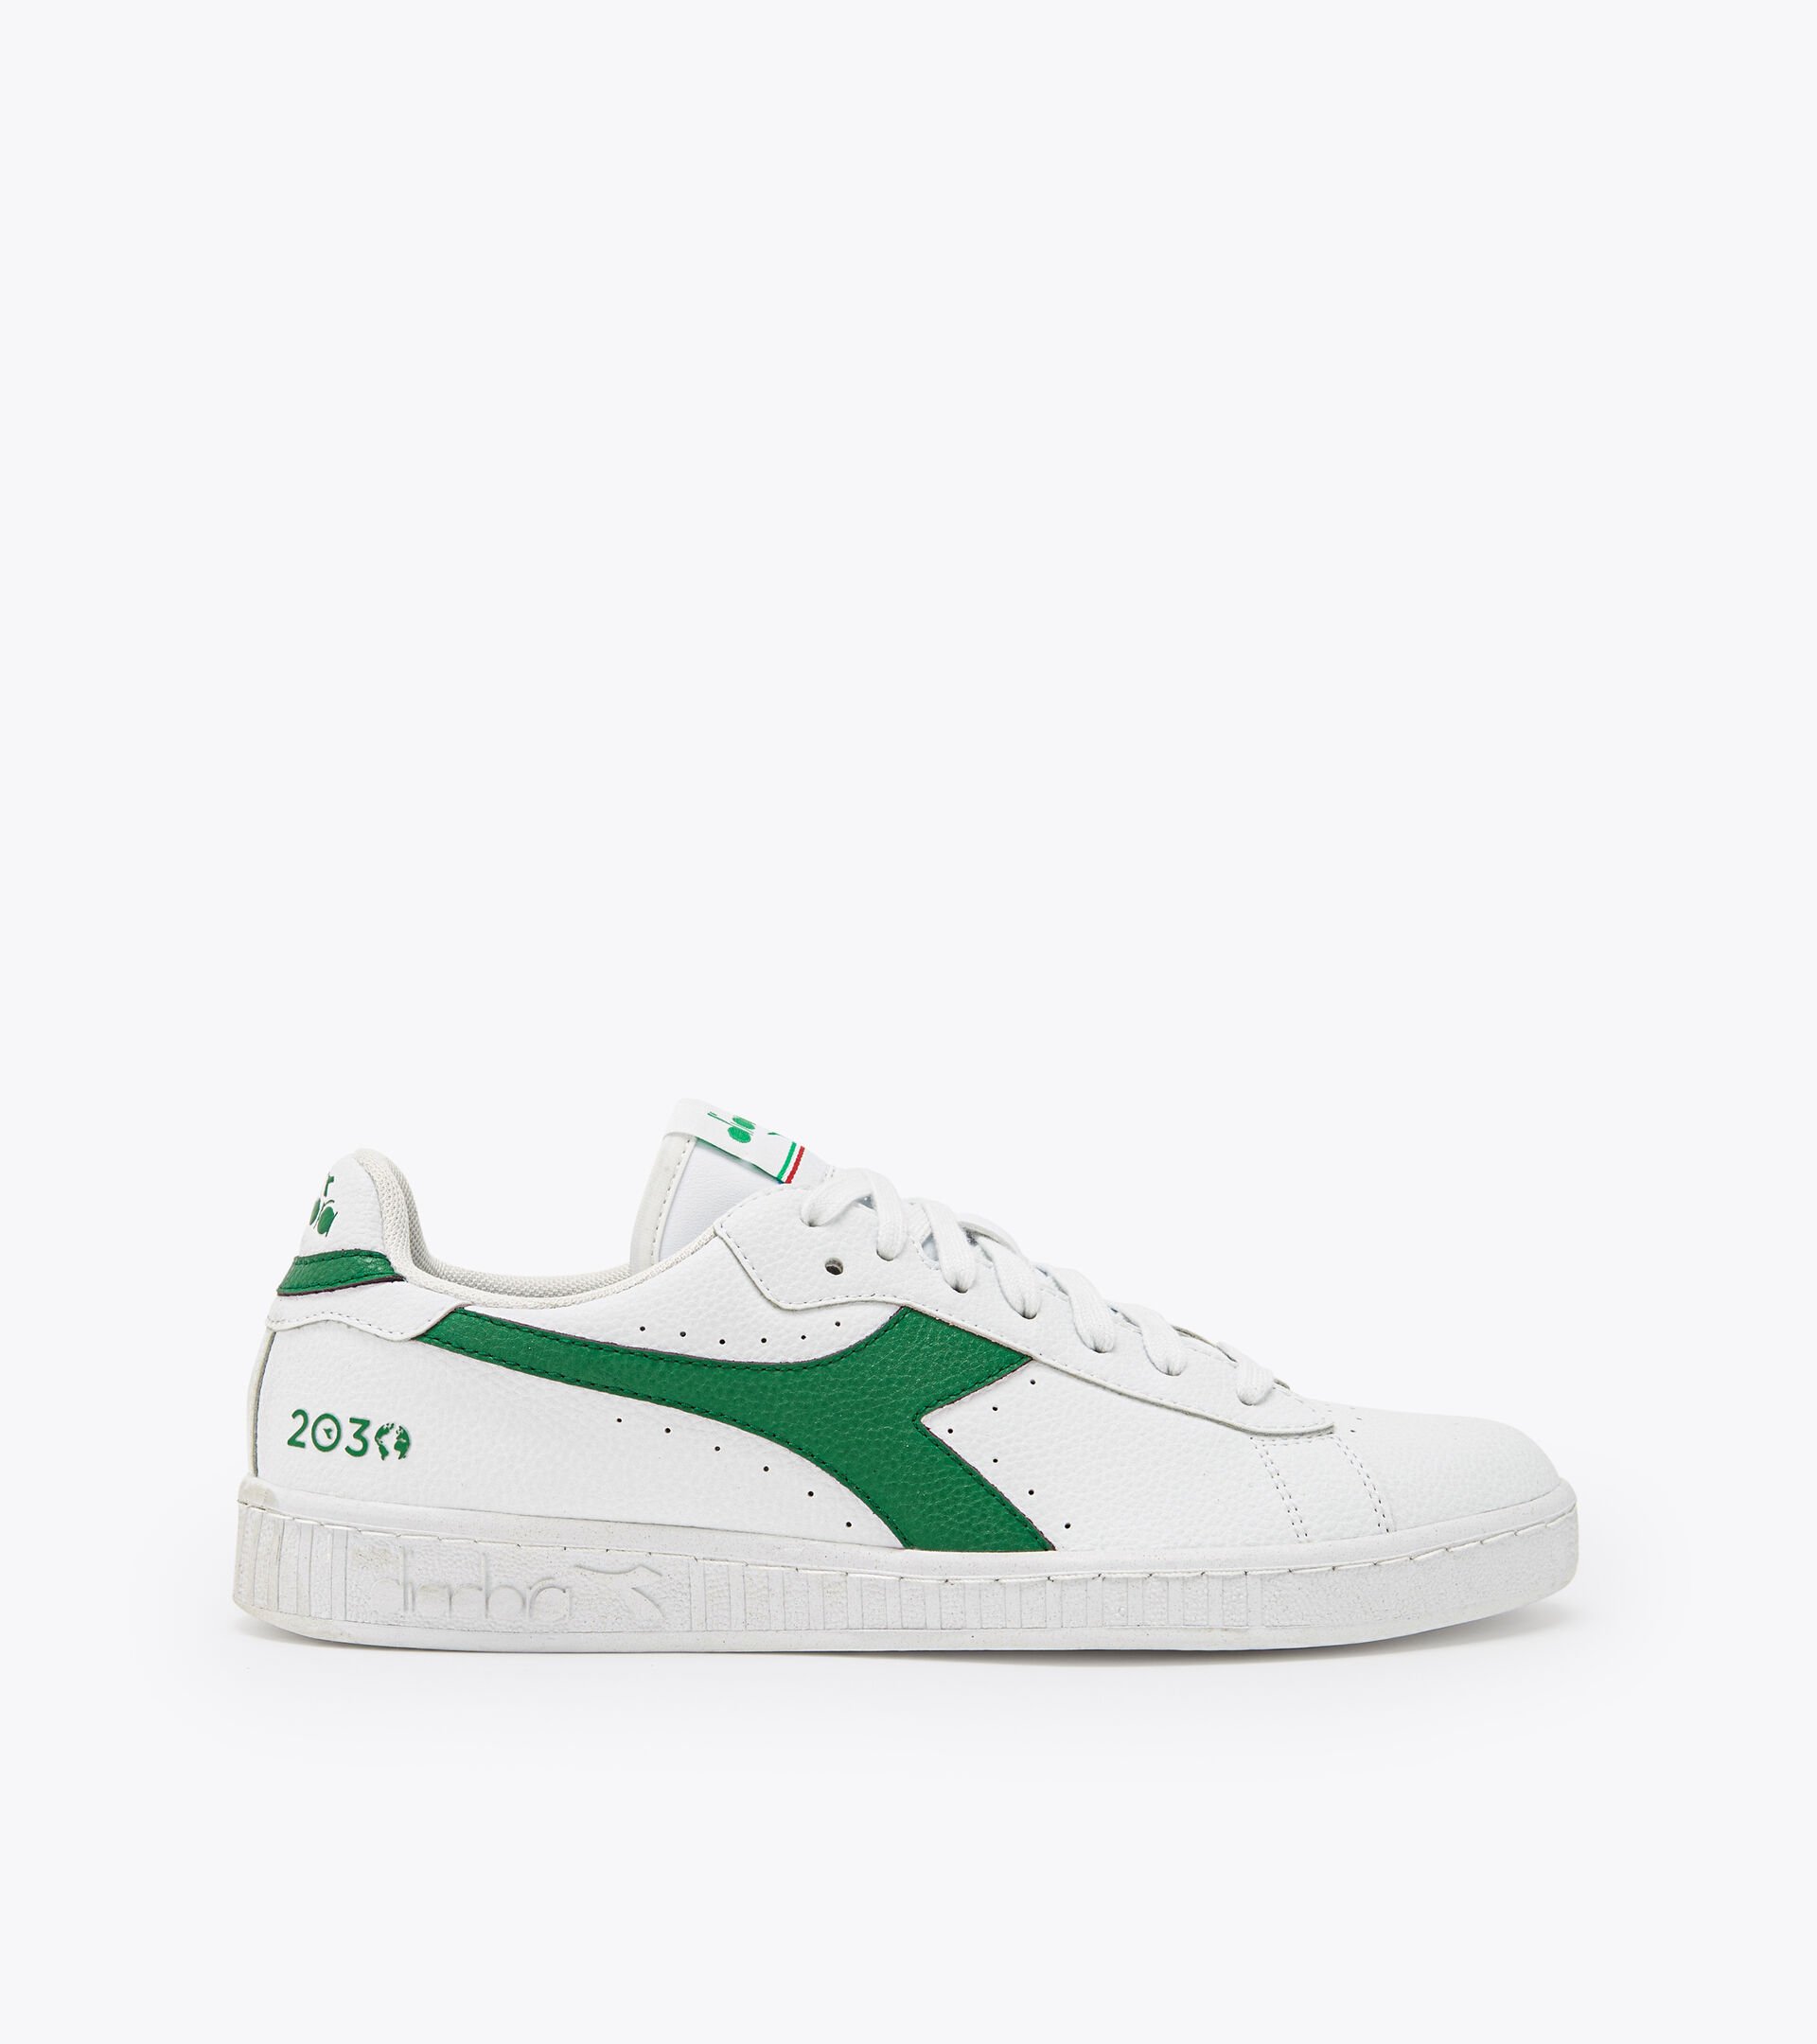 GAME L LOW 2030 Sporty sneakers - Unisex - Diadora Online Store US